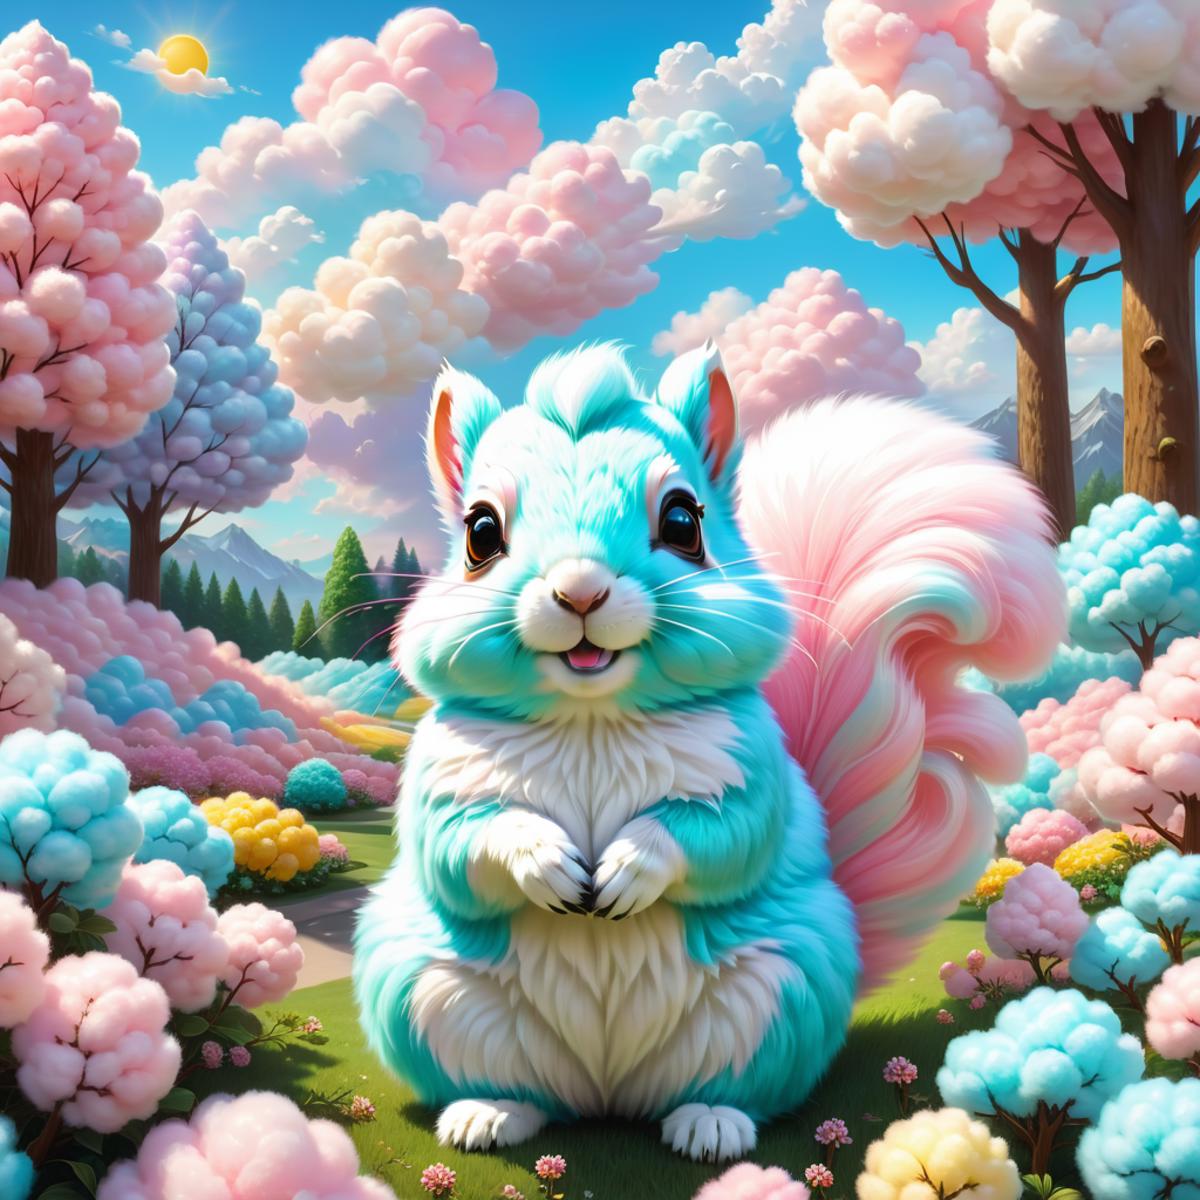 A blue, white, and pink squirrel poses for a picture in a colorful forest.